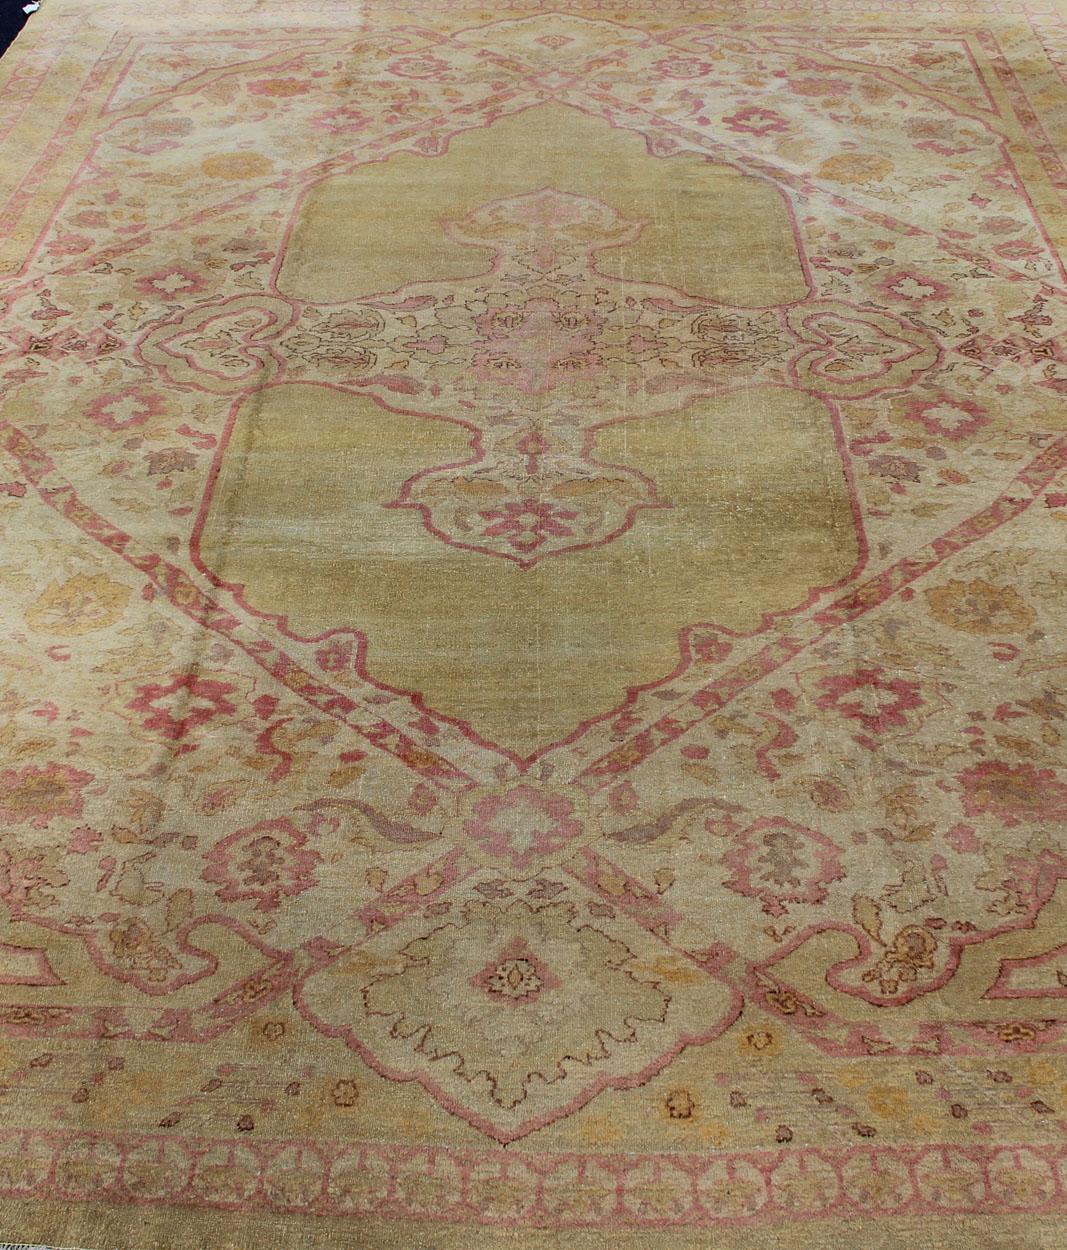 Antique Amritsar Rug With Medallion Design in Acidic-Yellow Green, Pink, Ivory. Keivan Woven Arts /  rug / J10-0301 / country of origin / type: India / Amritsar, circa Early-20th Century. Antique Amritsar, antique Agra.
Measures: 10'7 x